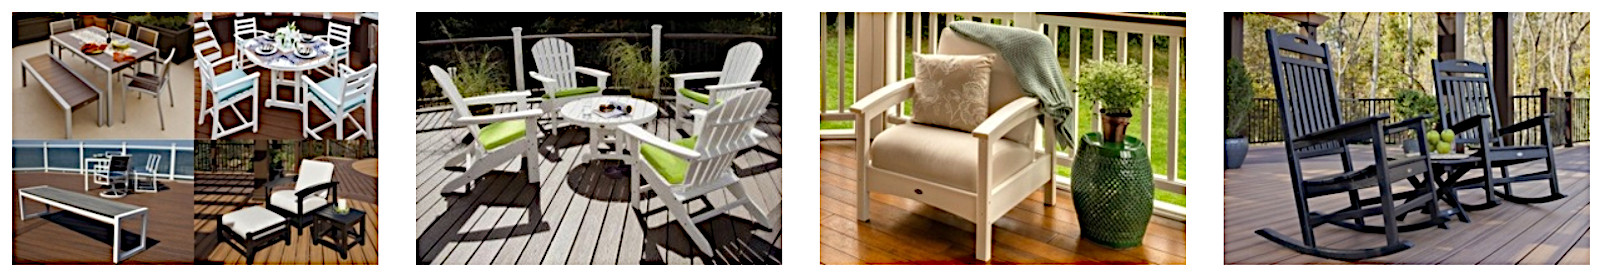 Recommended Trex outdoor furniture